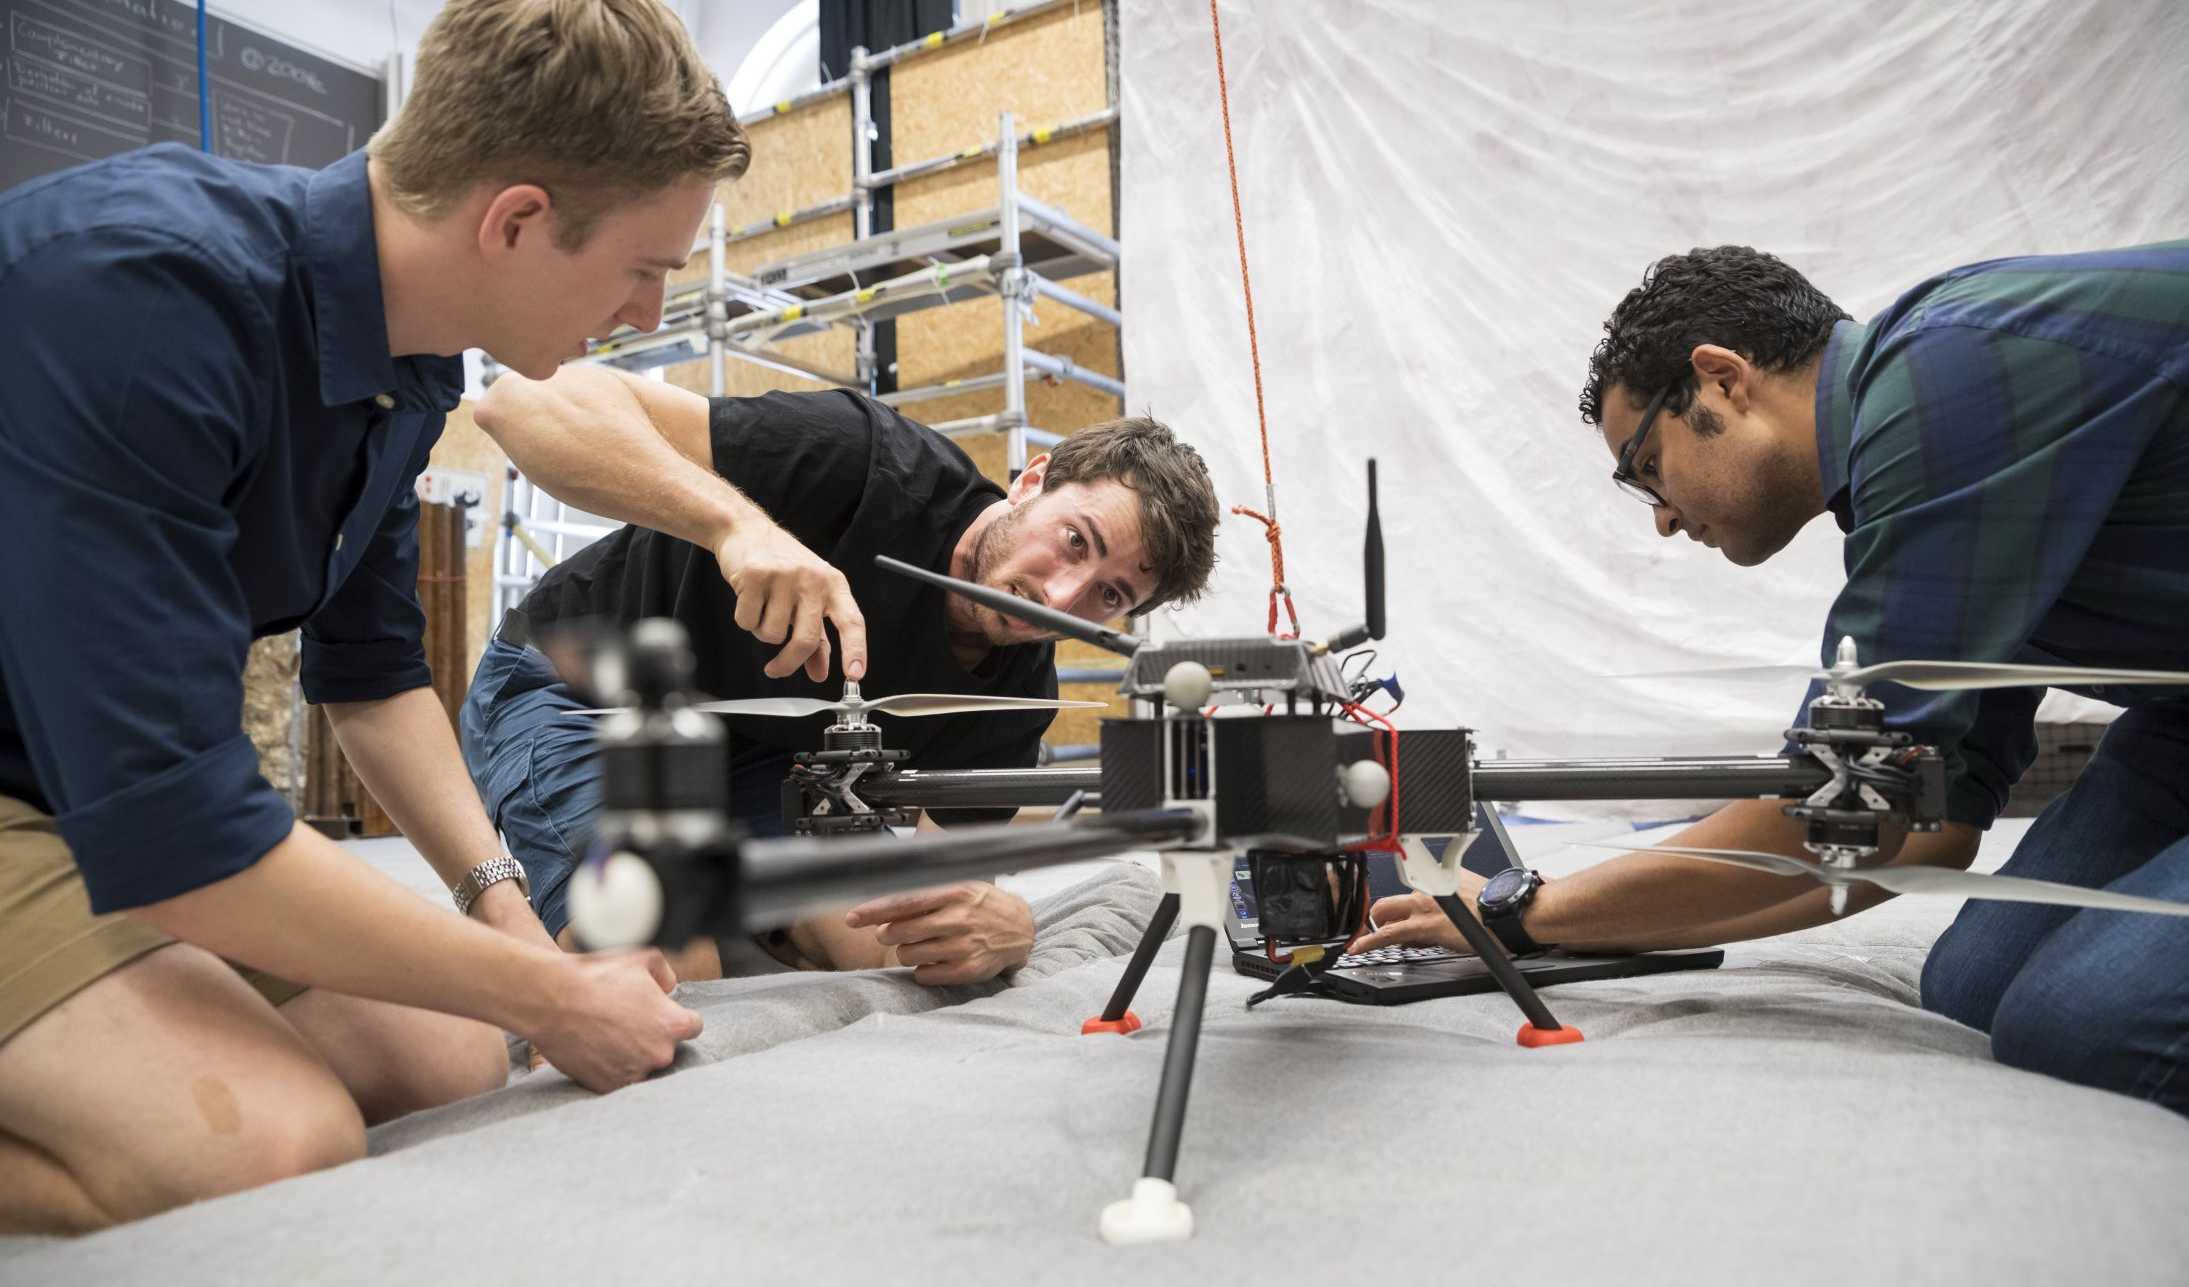 Timo Müller, Christian Sprecher and Kamel Mina kneeling on the floor, working on a drone